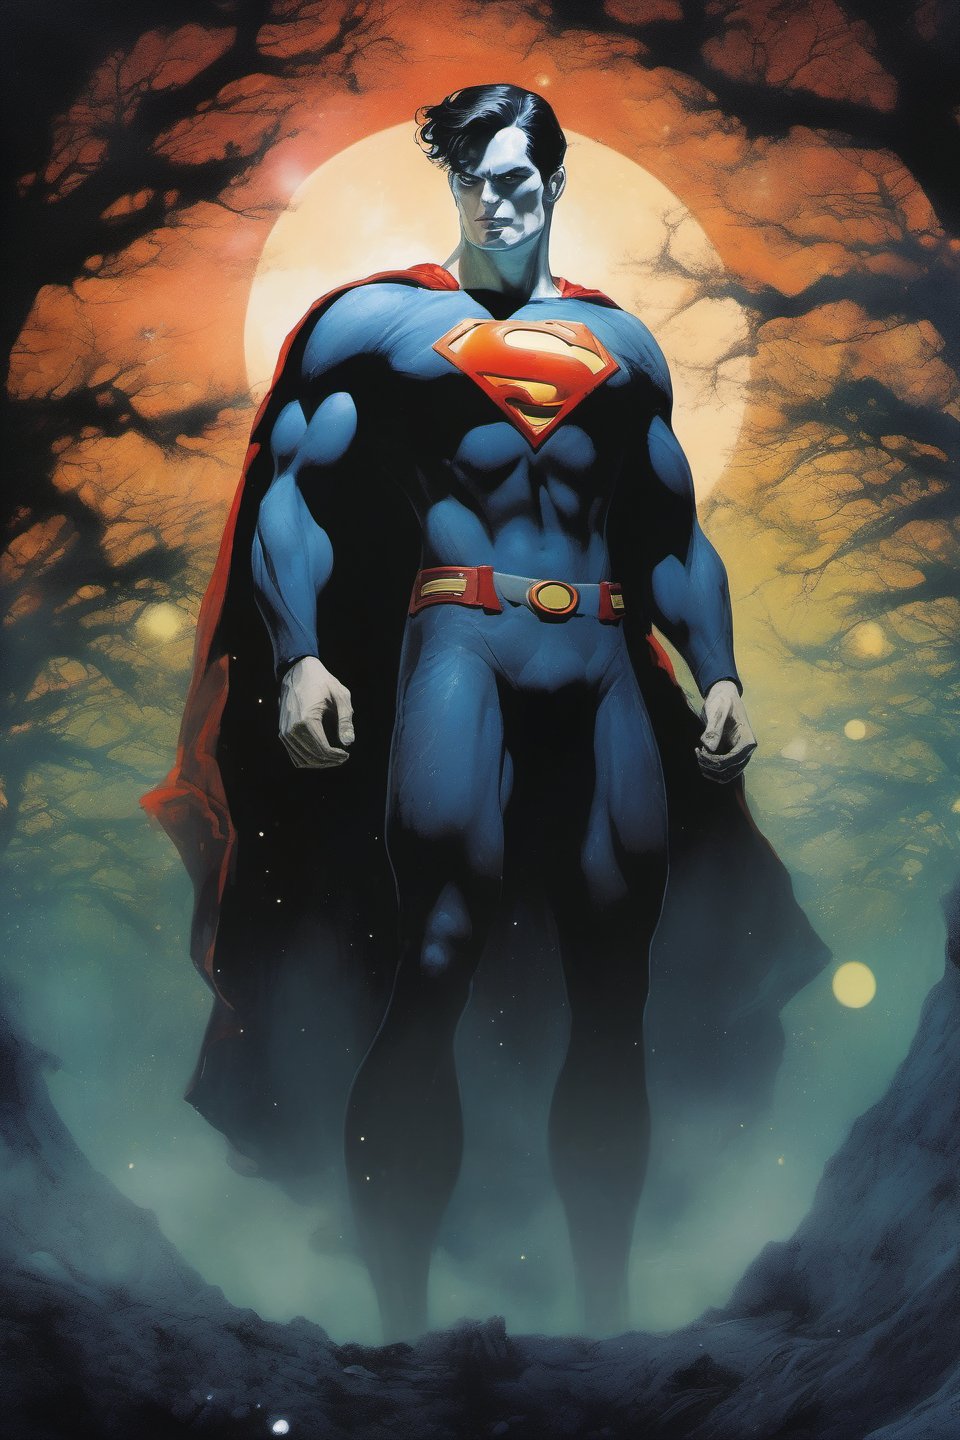 Bizarro, (Creepy Man), (Freak), (pale_white_skin), (short black spiky hair), (crazy eyes), (Superman's outfit), DC Comics, extremely supernatural colours,  Highly detailed, highly cinematic, close-up image of a deity of Vengance, perfect composition, psychedelic colours, magical flowing mist, forest nature, lots of details, nightsky, stars, moon, metallic ink, beautifully lit, a fine art painting by drew struzan and karol bak, gothic art, dark and mysterious, ilya kuvshinov, russ mills, 
